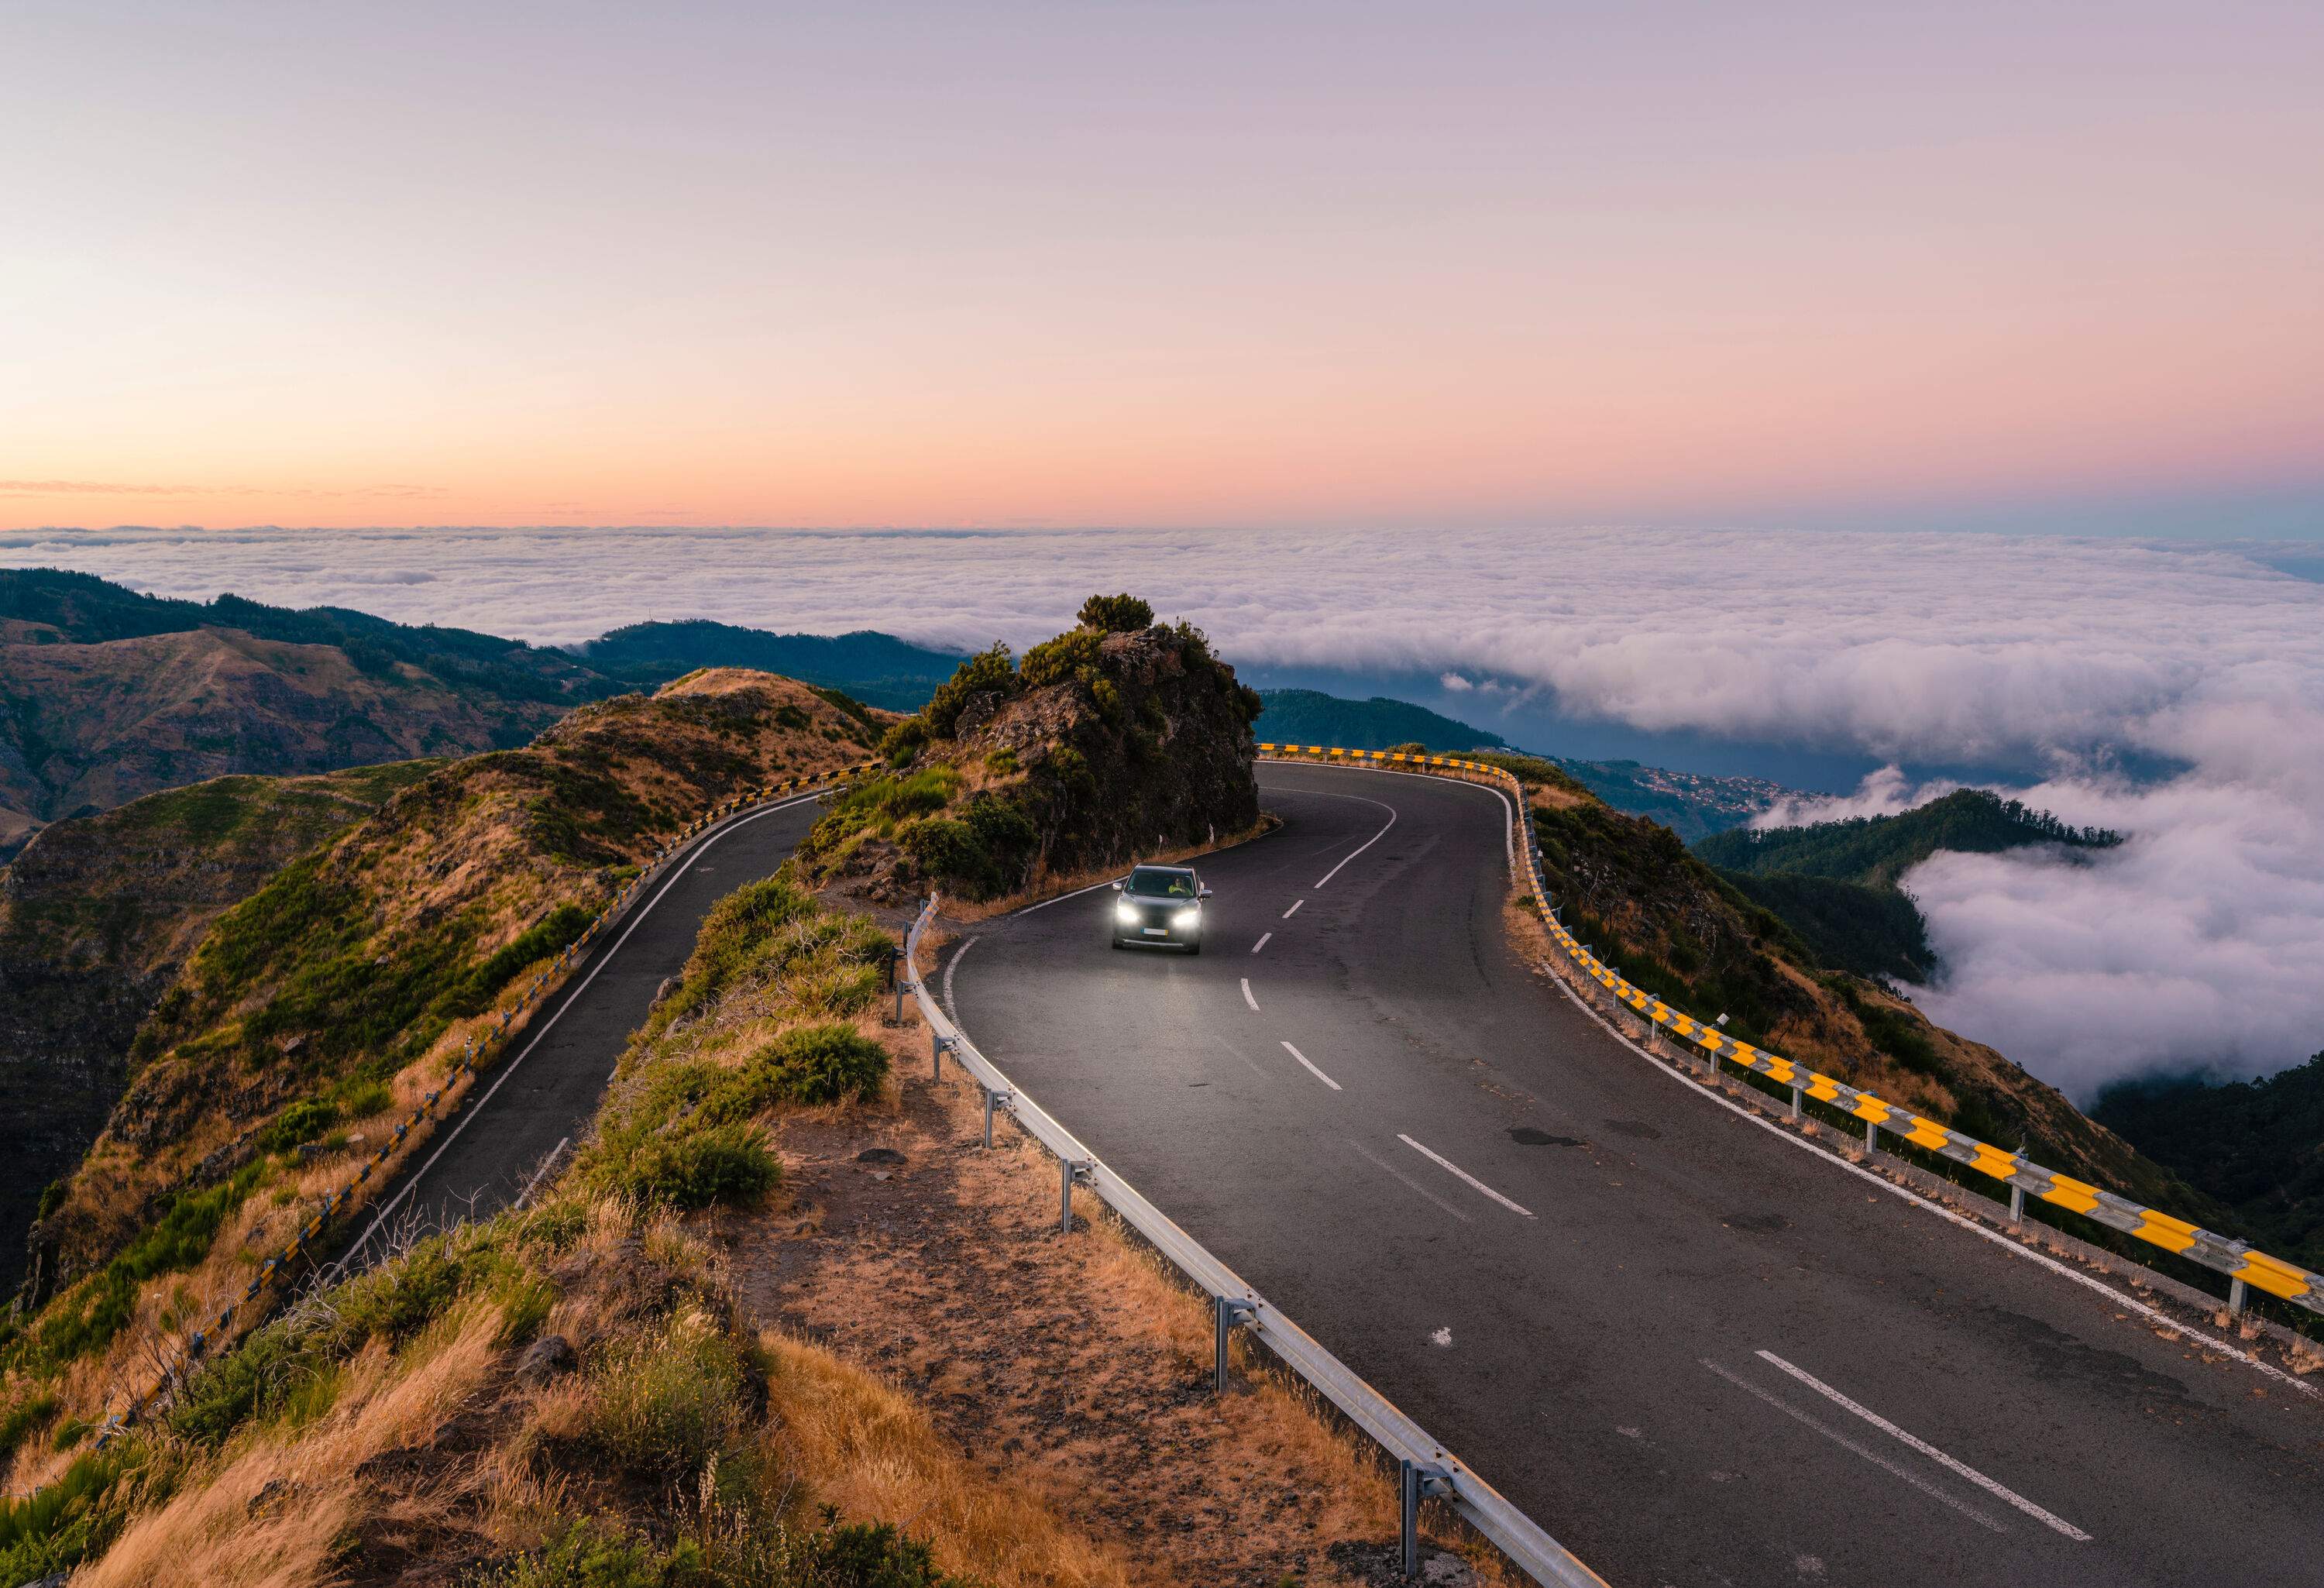 A car on a winding mountain road with a background of a sea of clouds covering the mountain range.